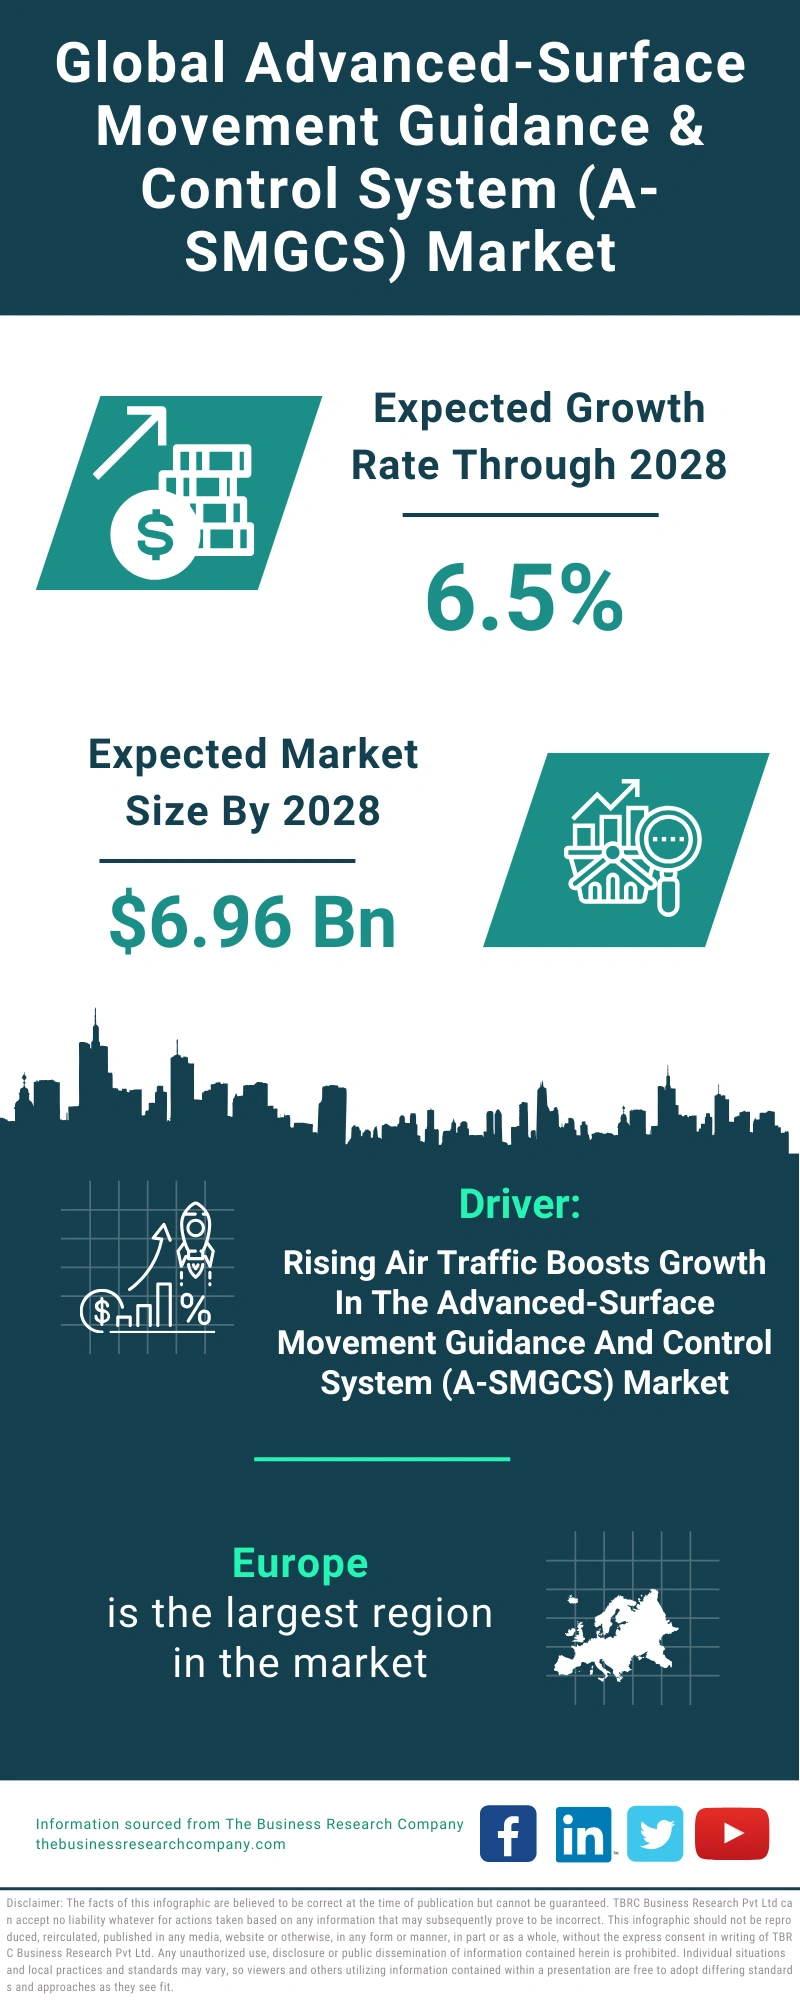 Advanced-Surface Movement Guidance & Control System (A-SMGCS) Global Market Report 2024